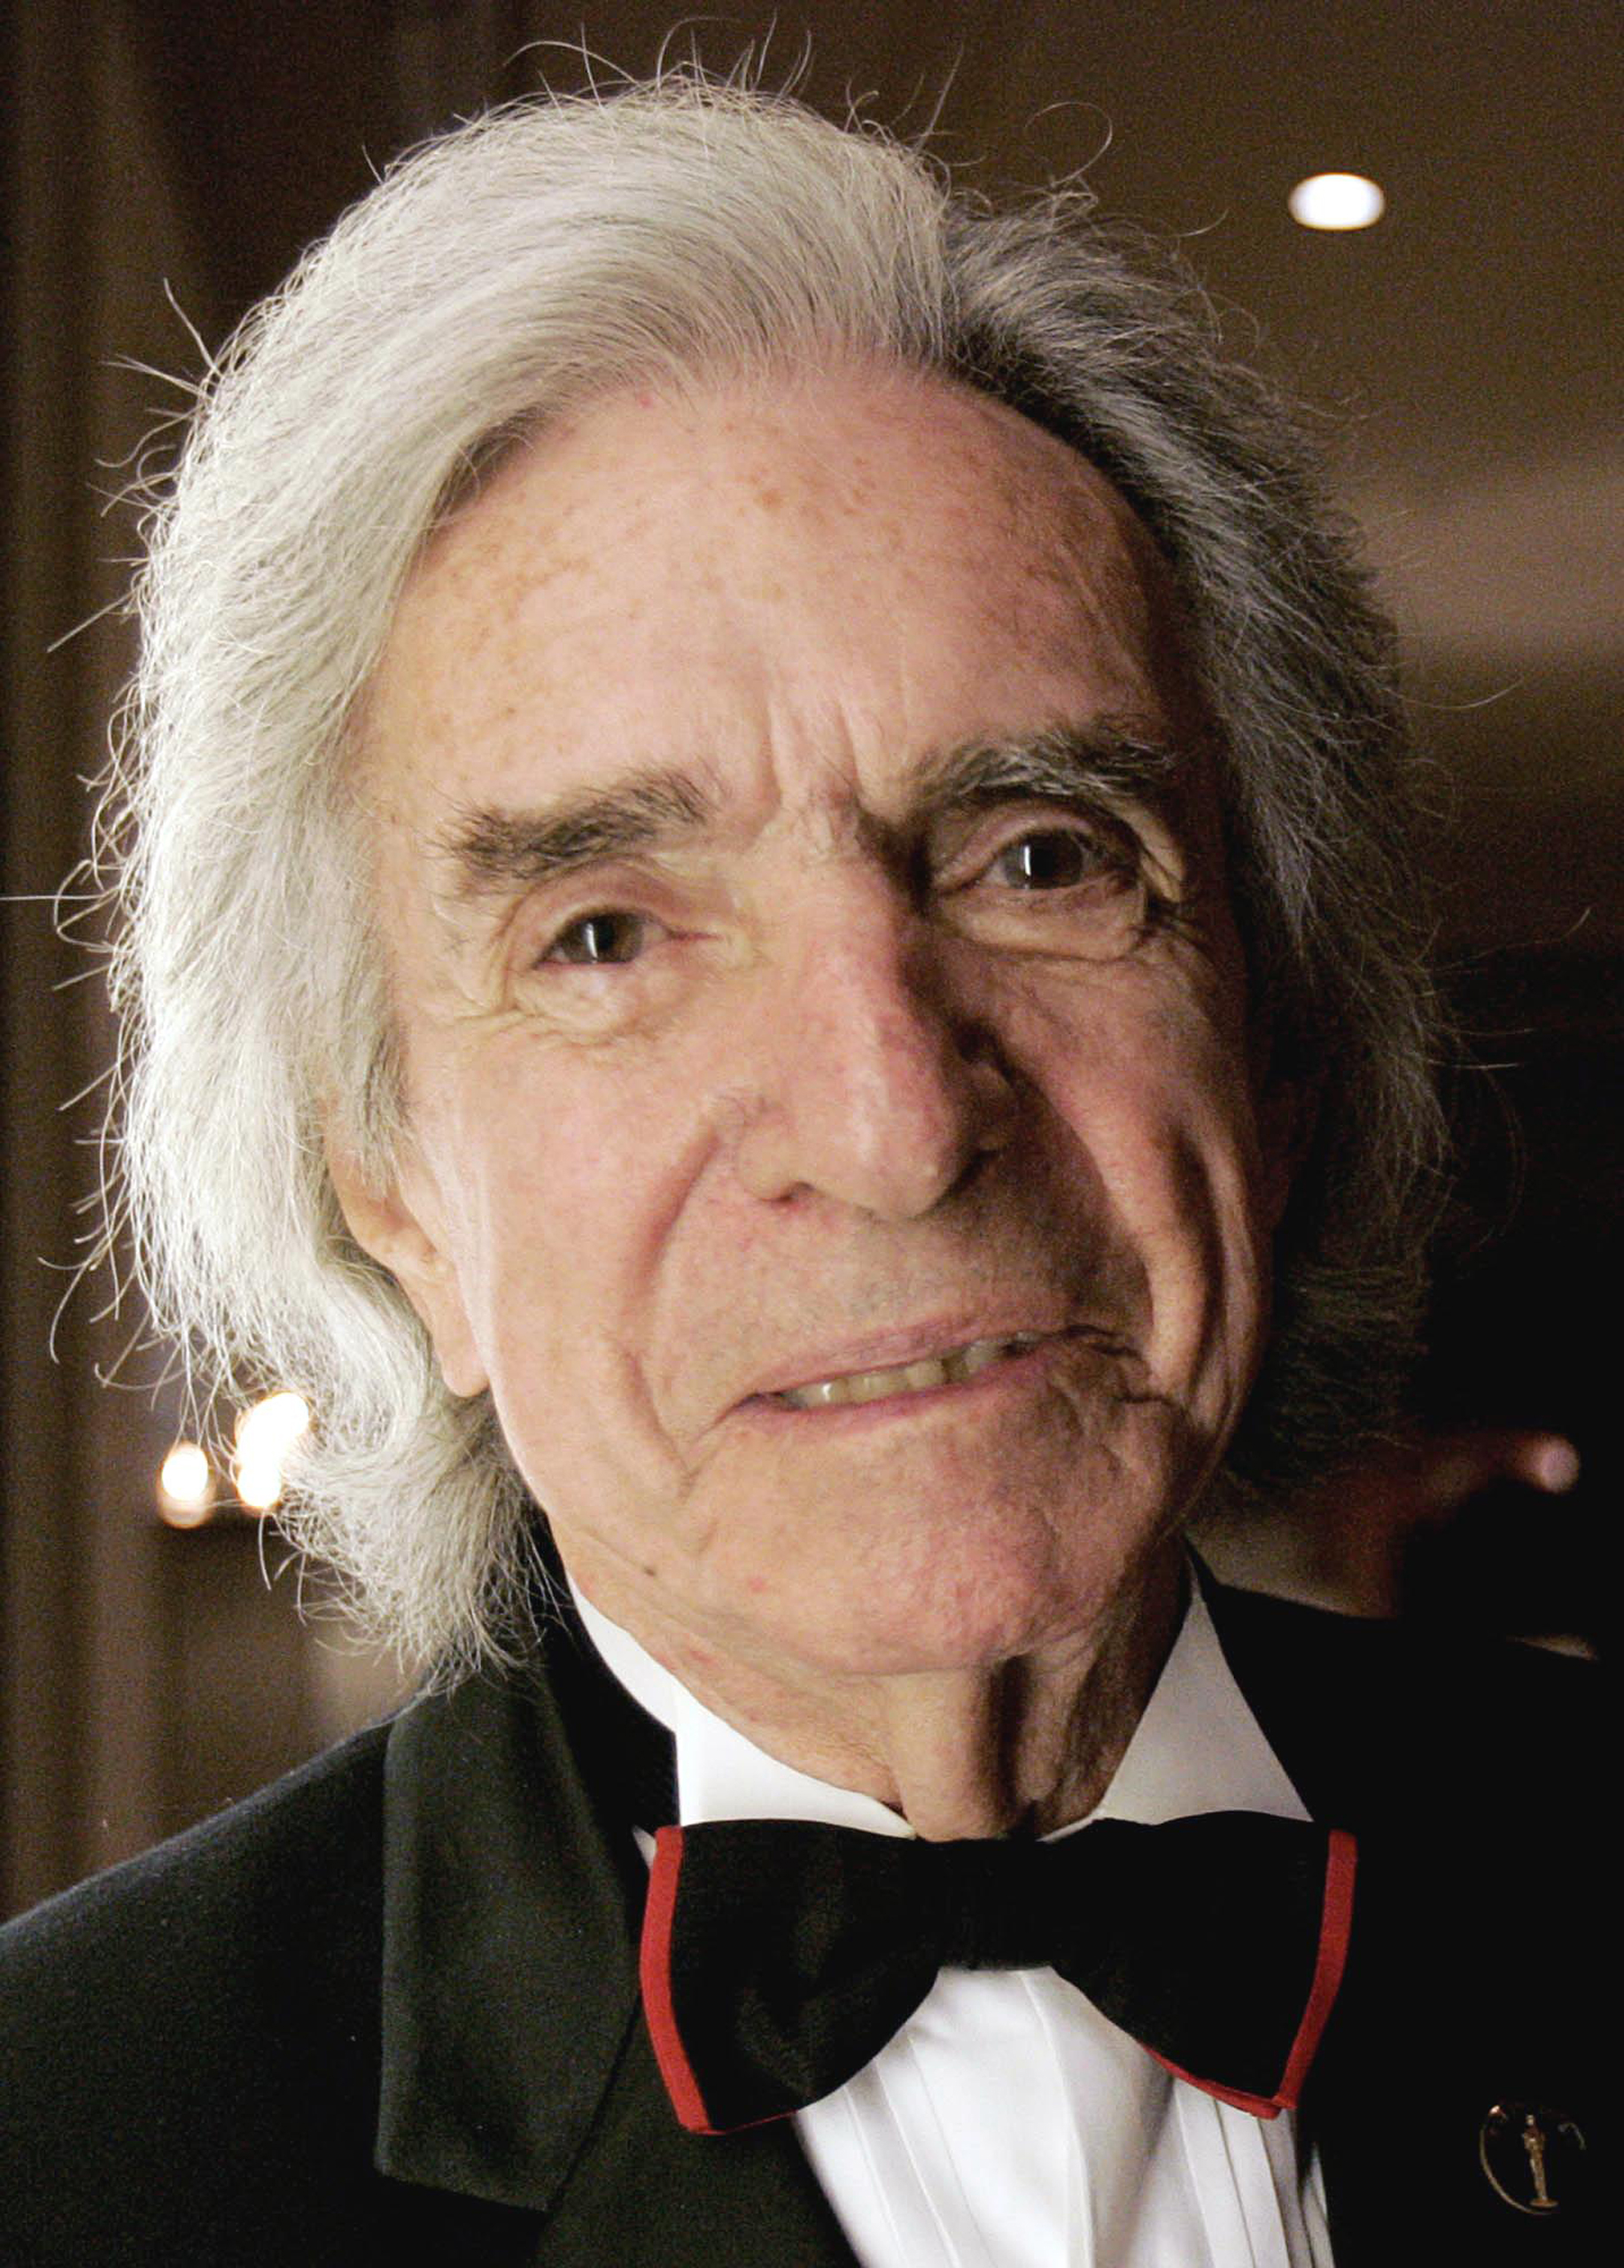 Arthur Hiller poses for a photo before the start of the Directors Guild of Canada Award Ceremonies in Toronto on Oct. 2, 2004. (J.P. Moczulski—AP)